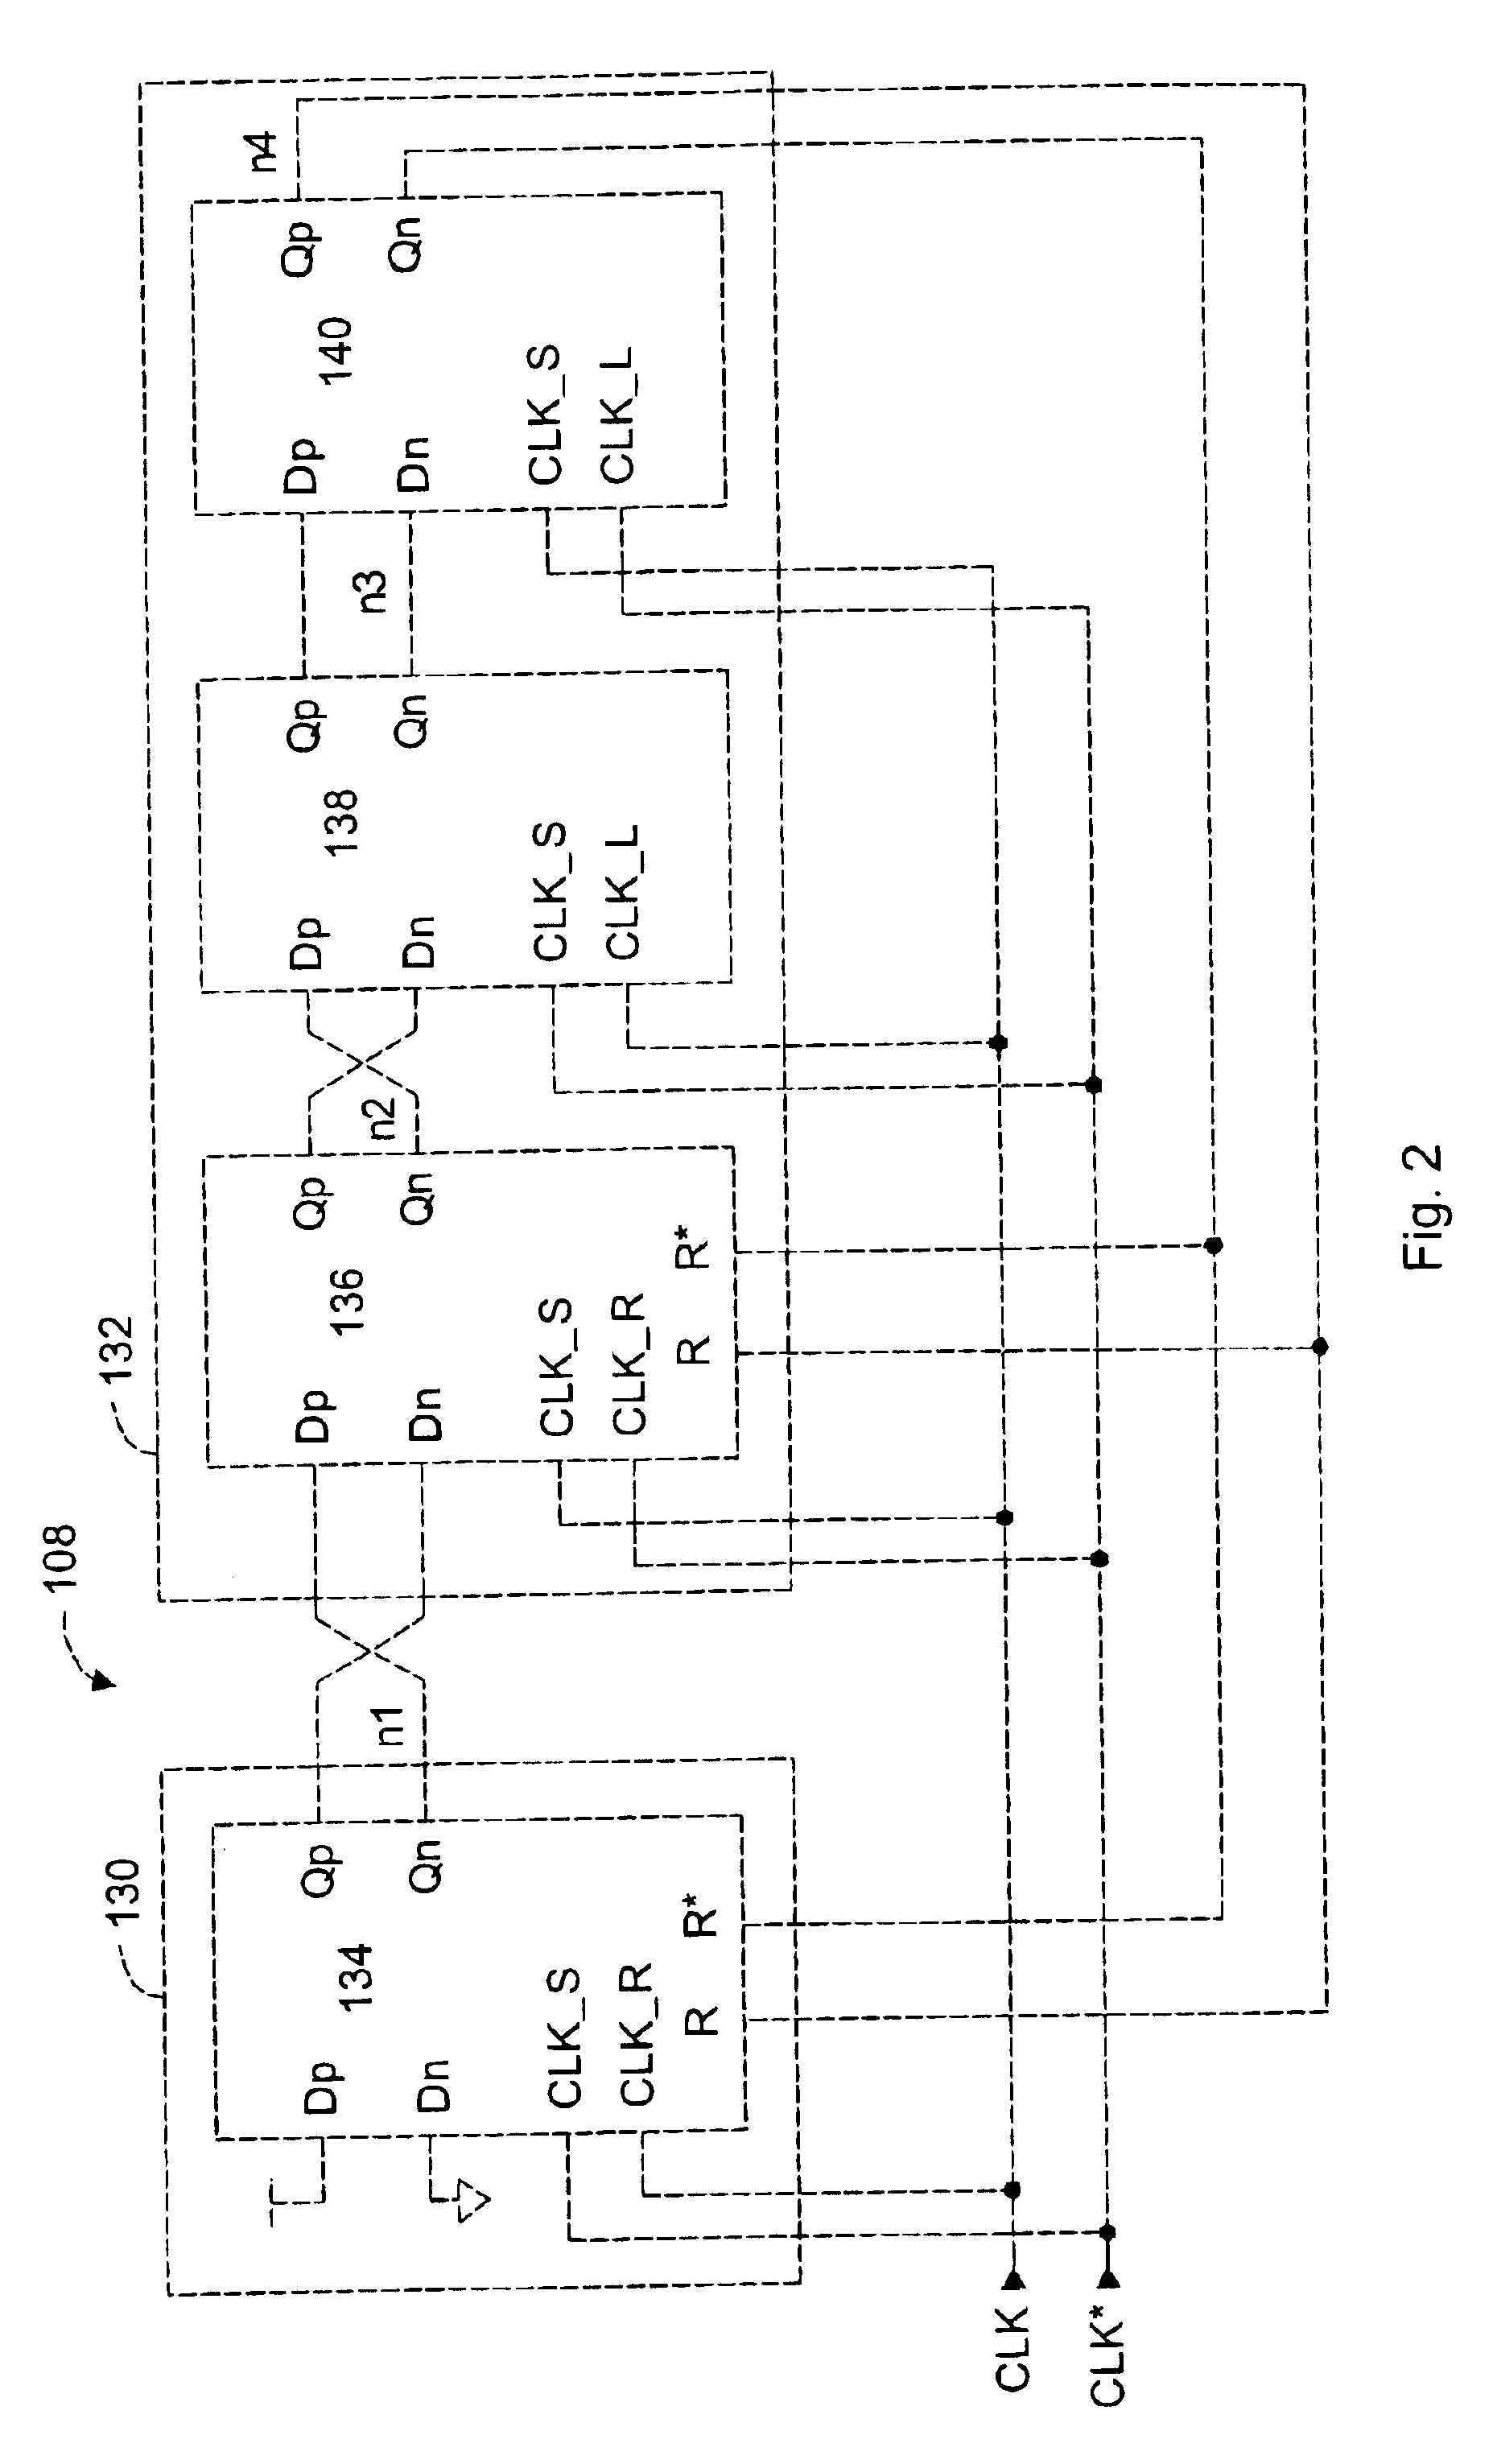 Frequency divider system